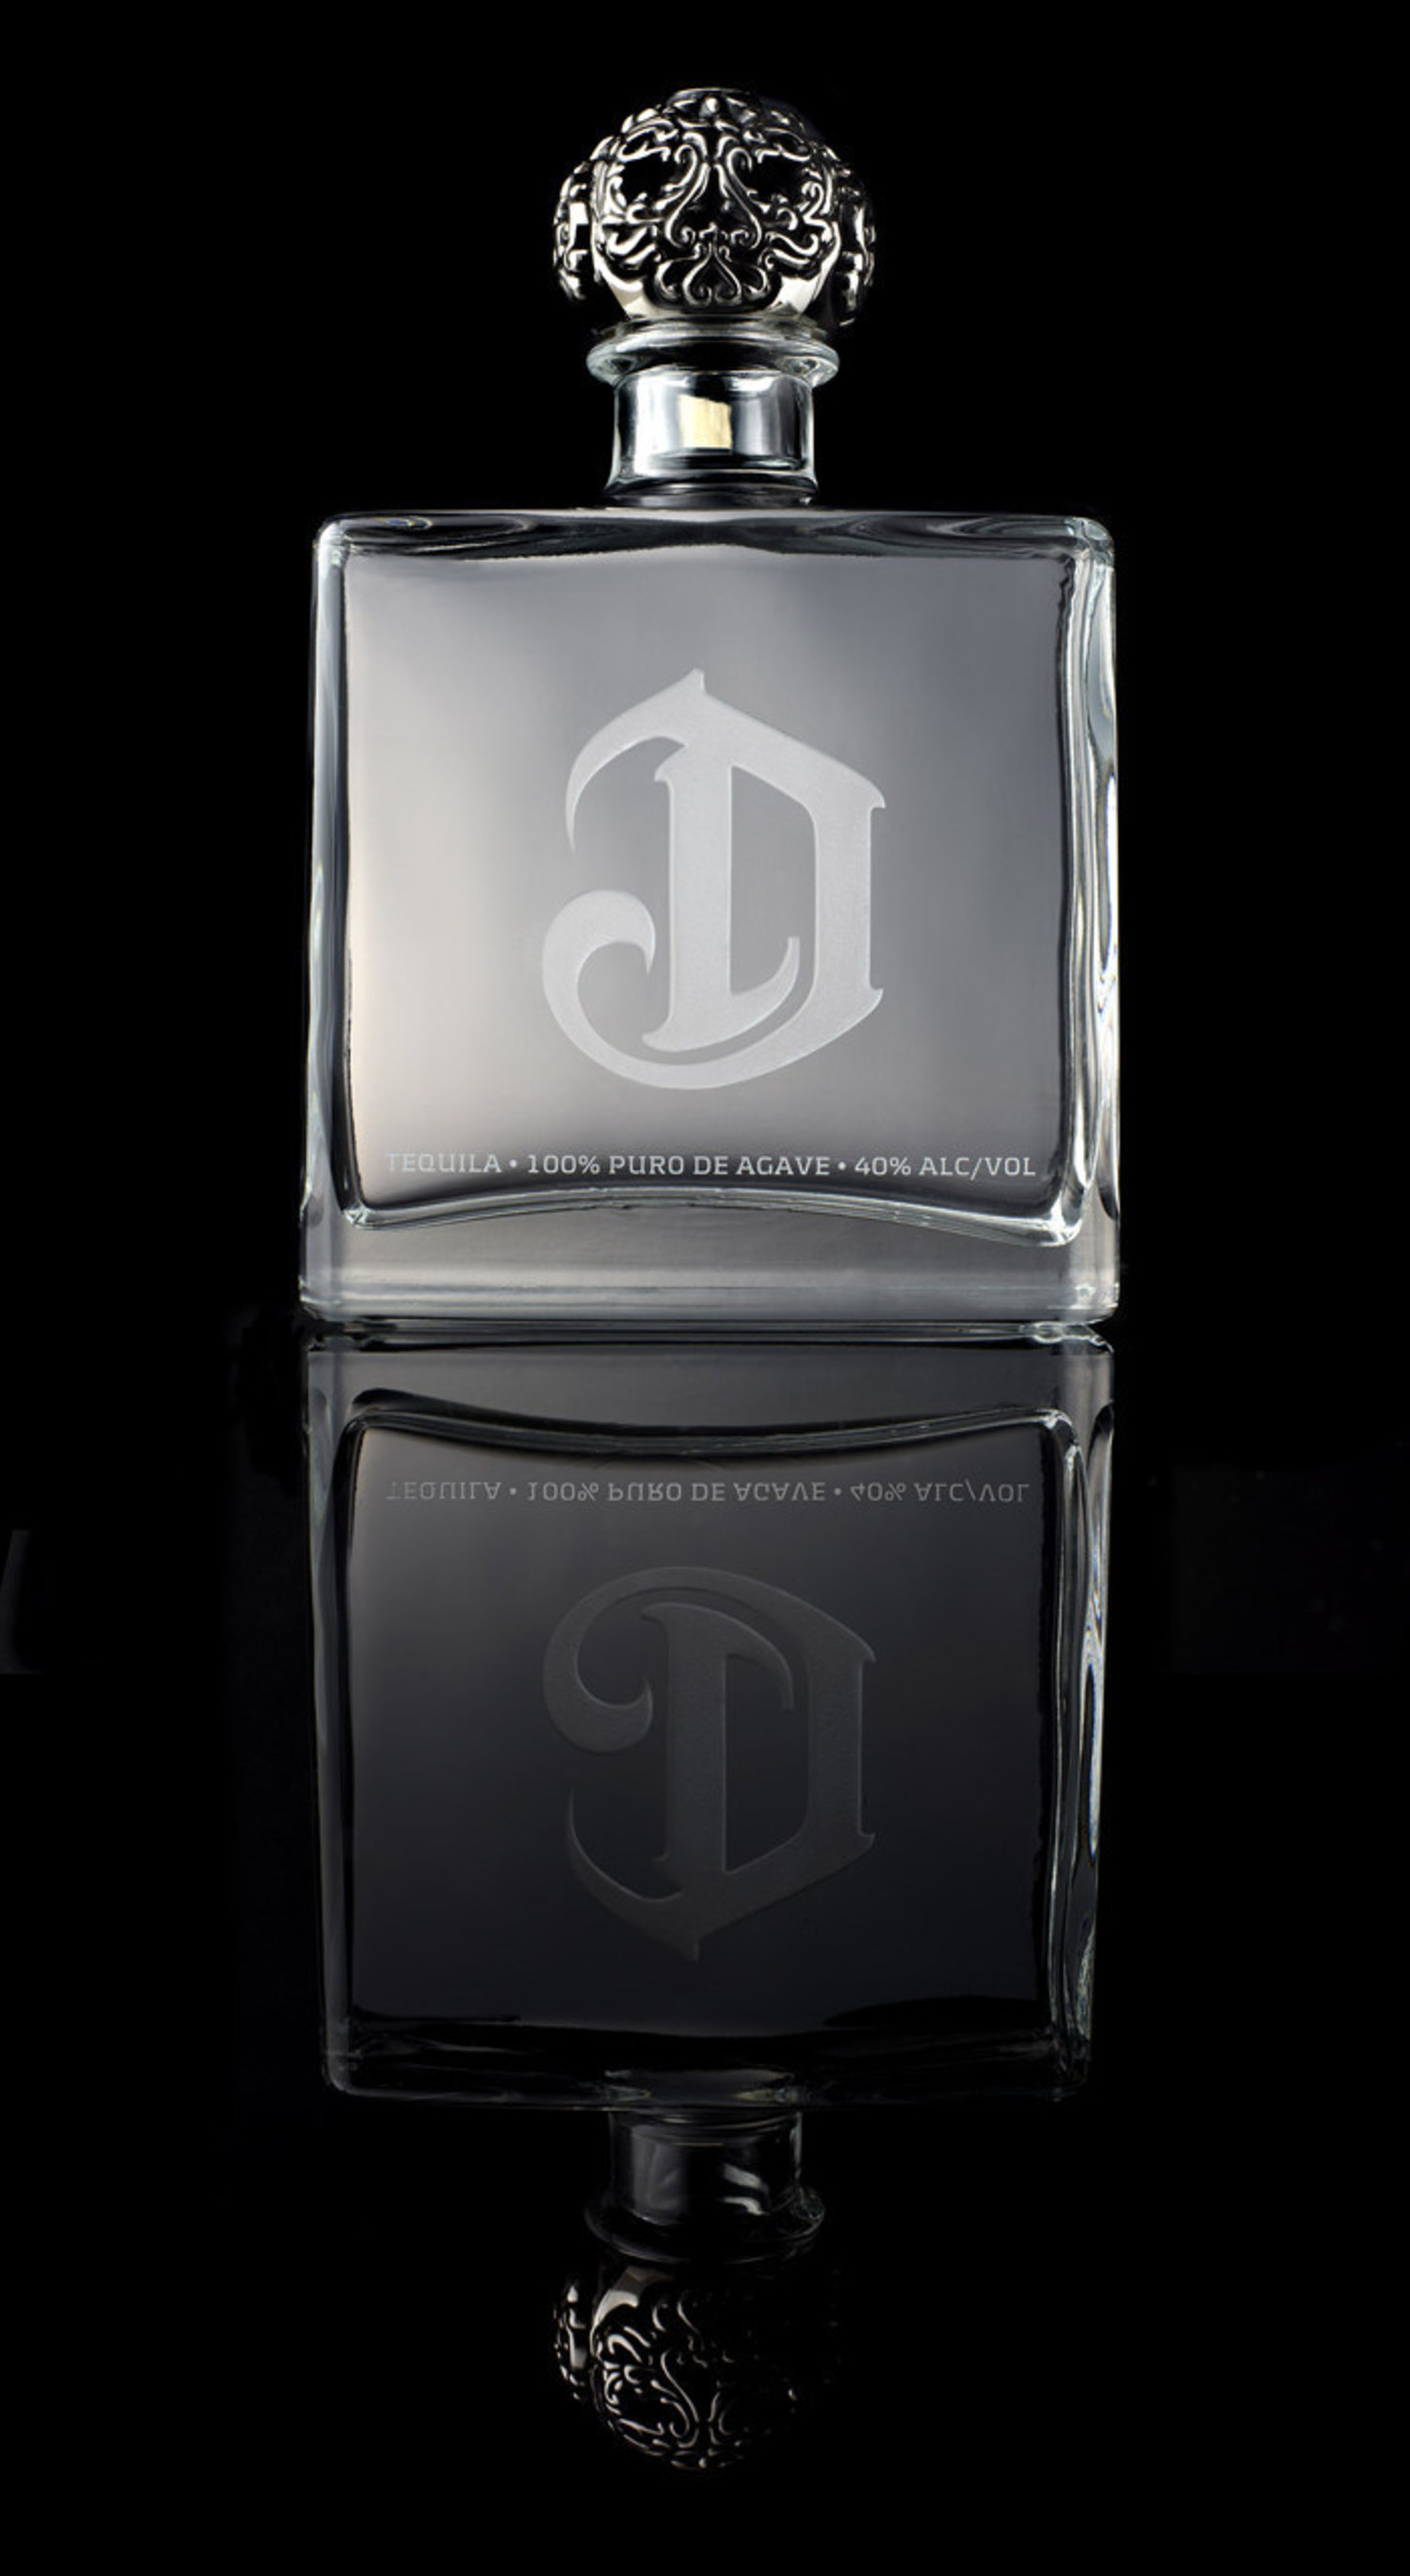 Leading the DELEON(R) Tequila line-up is the new DELEON(R) Platinum Tequila ($60 MSRP per 750ml), an ultra-premium Blanco unrivaled in smoothness with a rich, complex agave honey that is slow-fermented and twice-distilled.